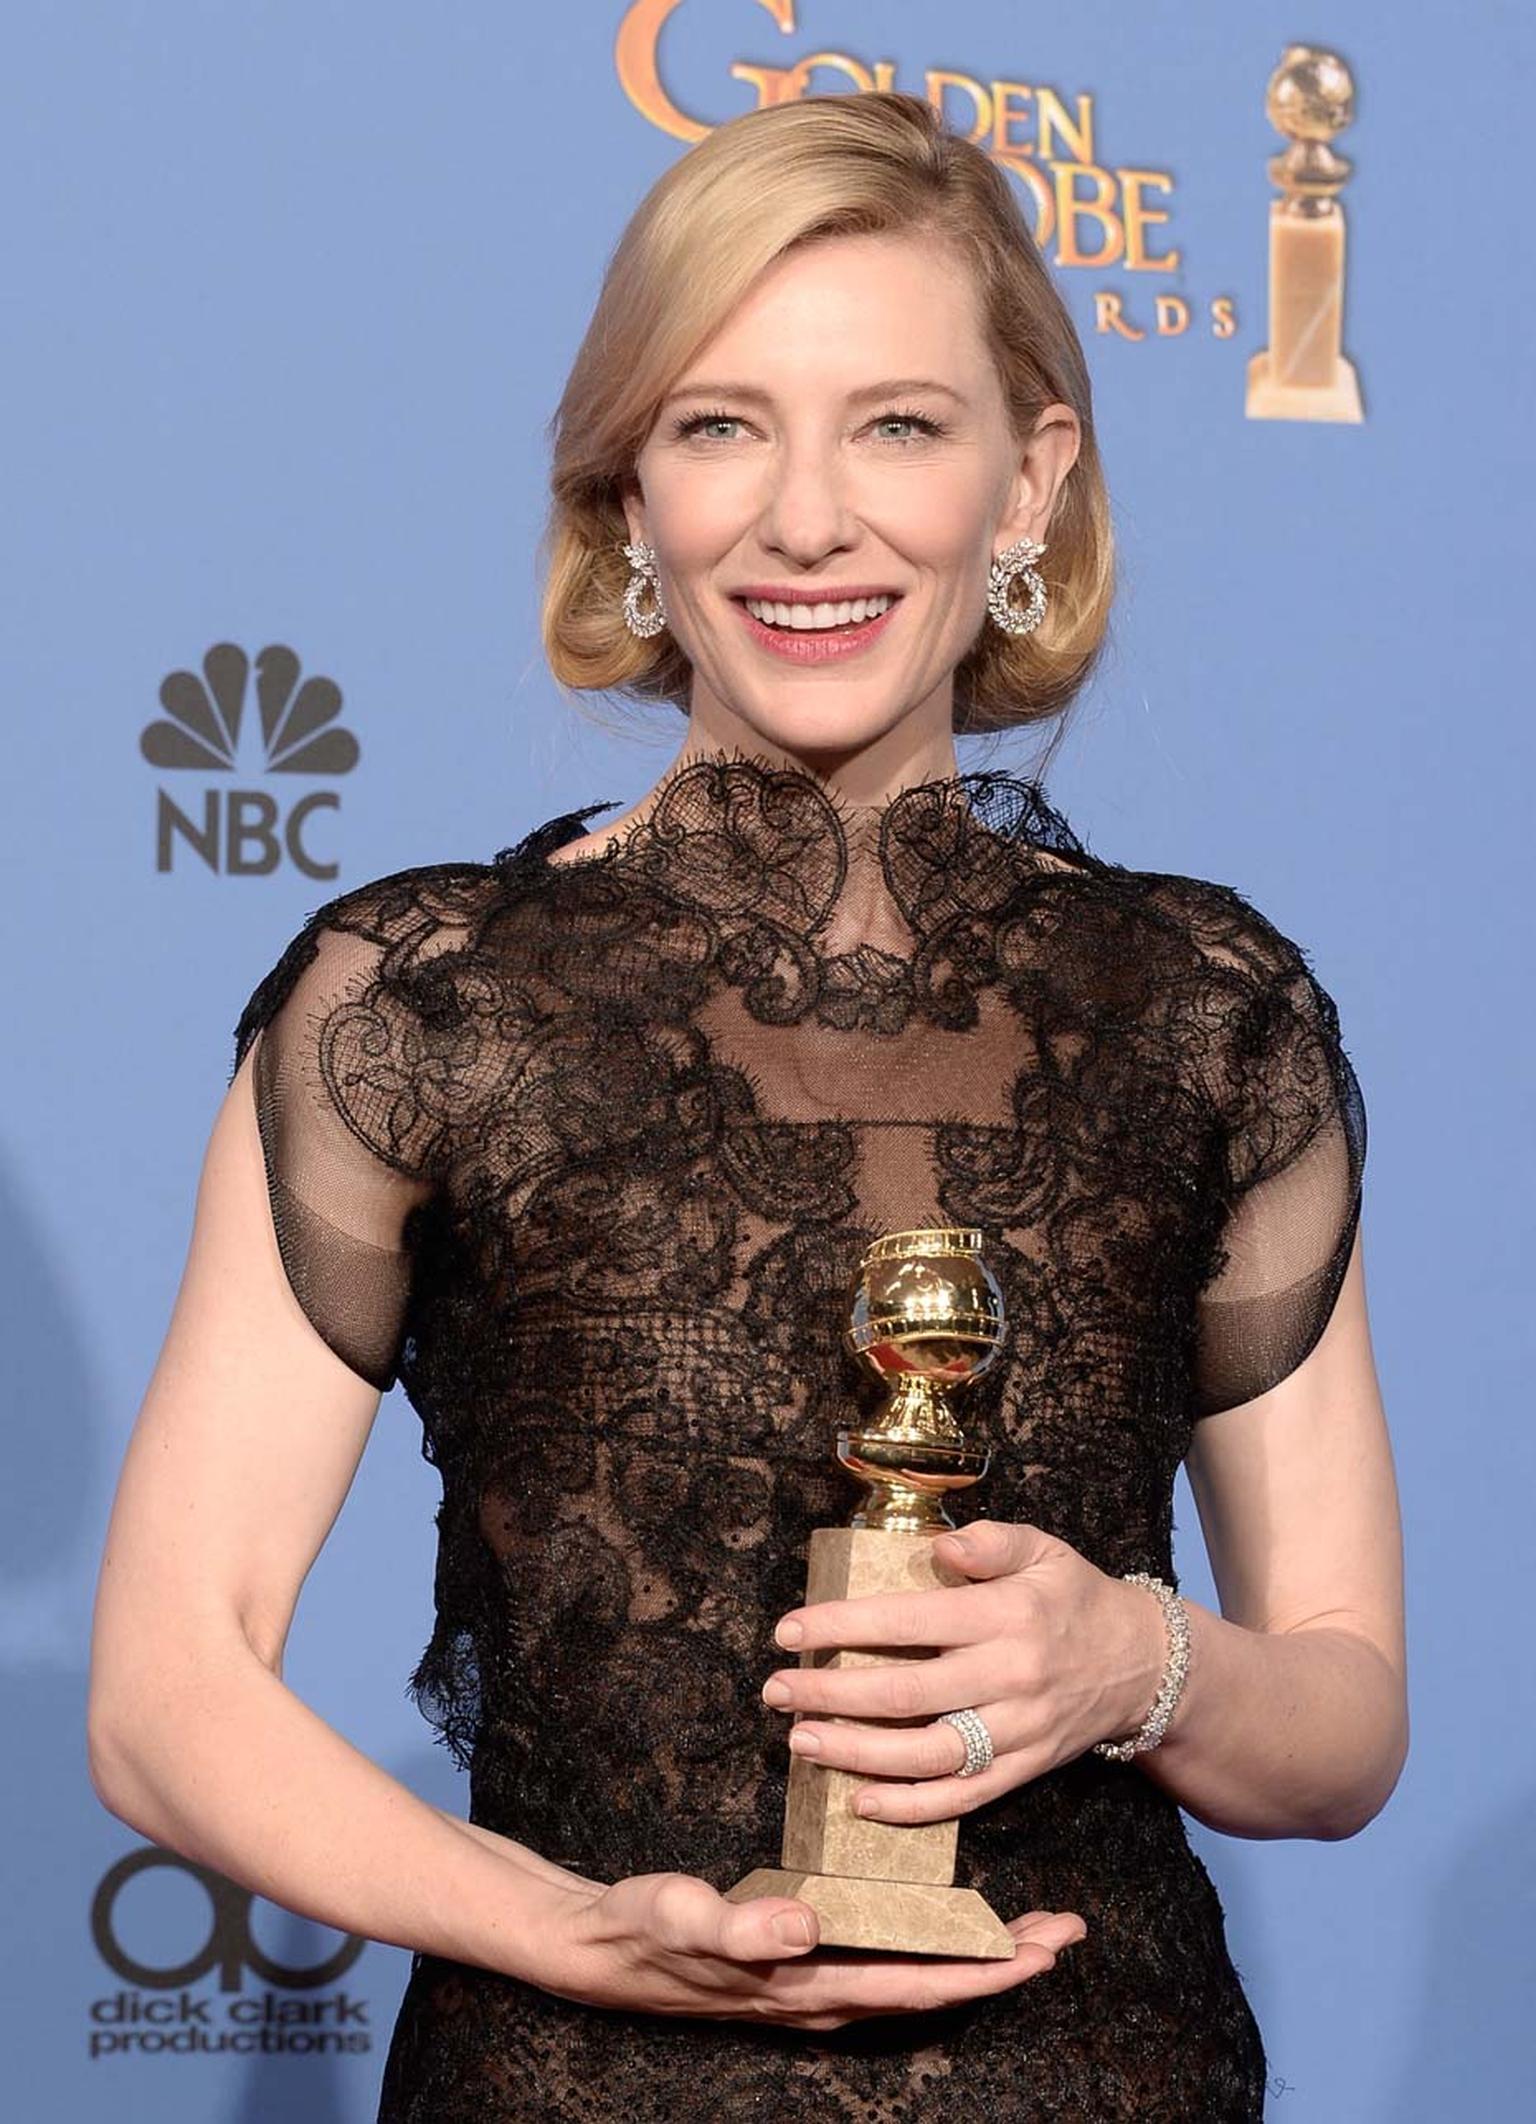 The third star to accept the Green Carpet Challenge was Cate Blanchett at the Golden Globe Awards in January 2014